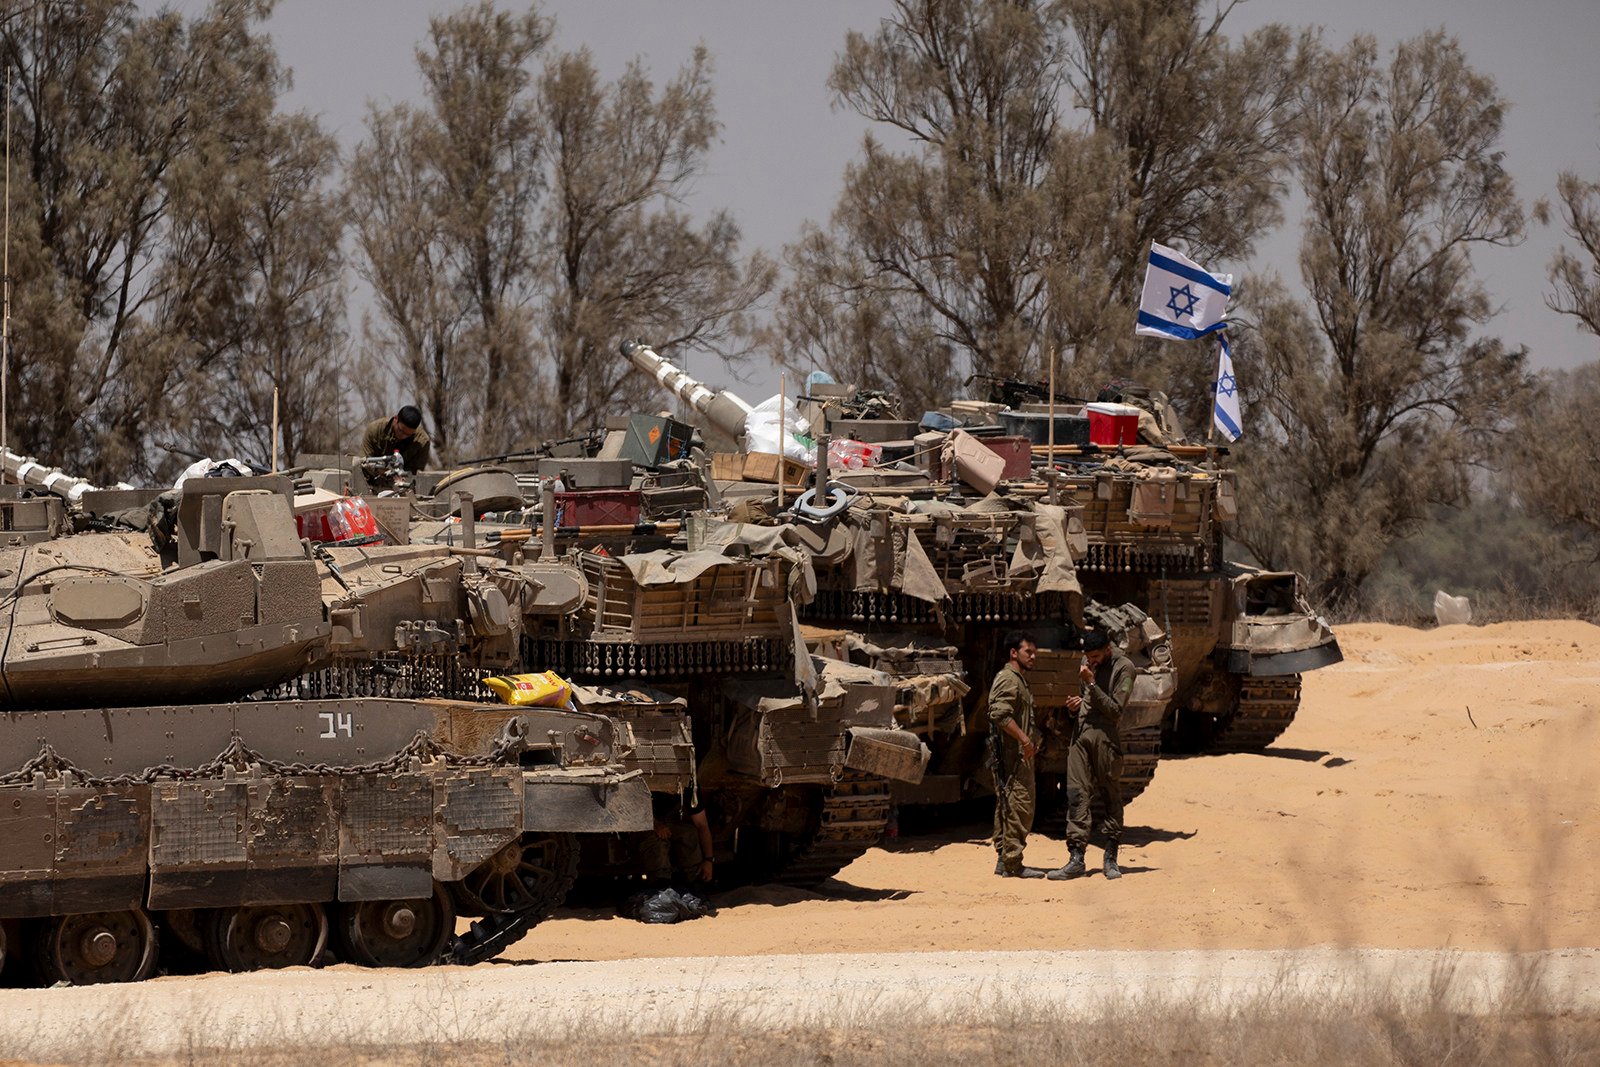 Israeli soldiers stand near tanks a long the border with the Gaza Strip. Photo: TNS